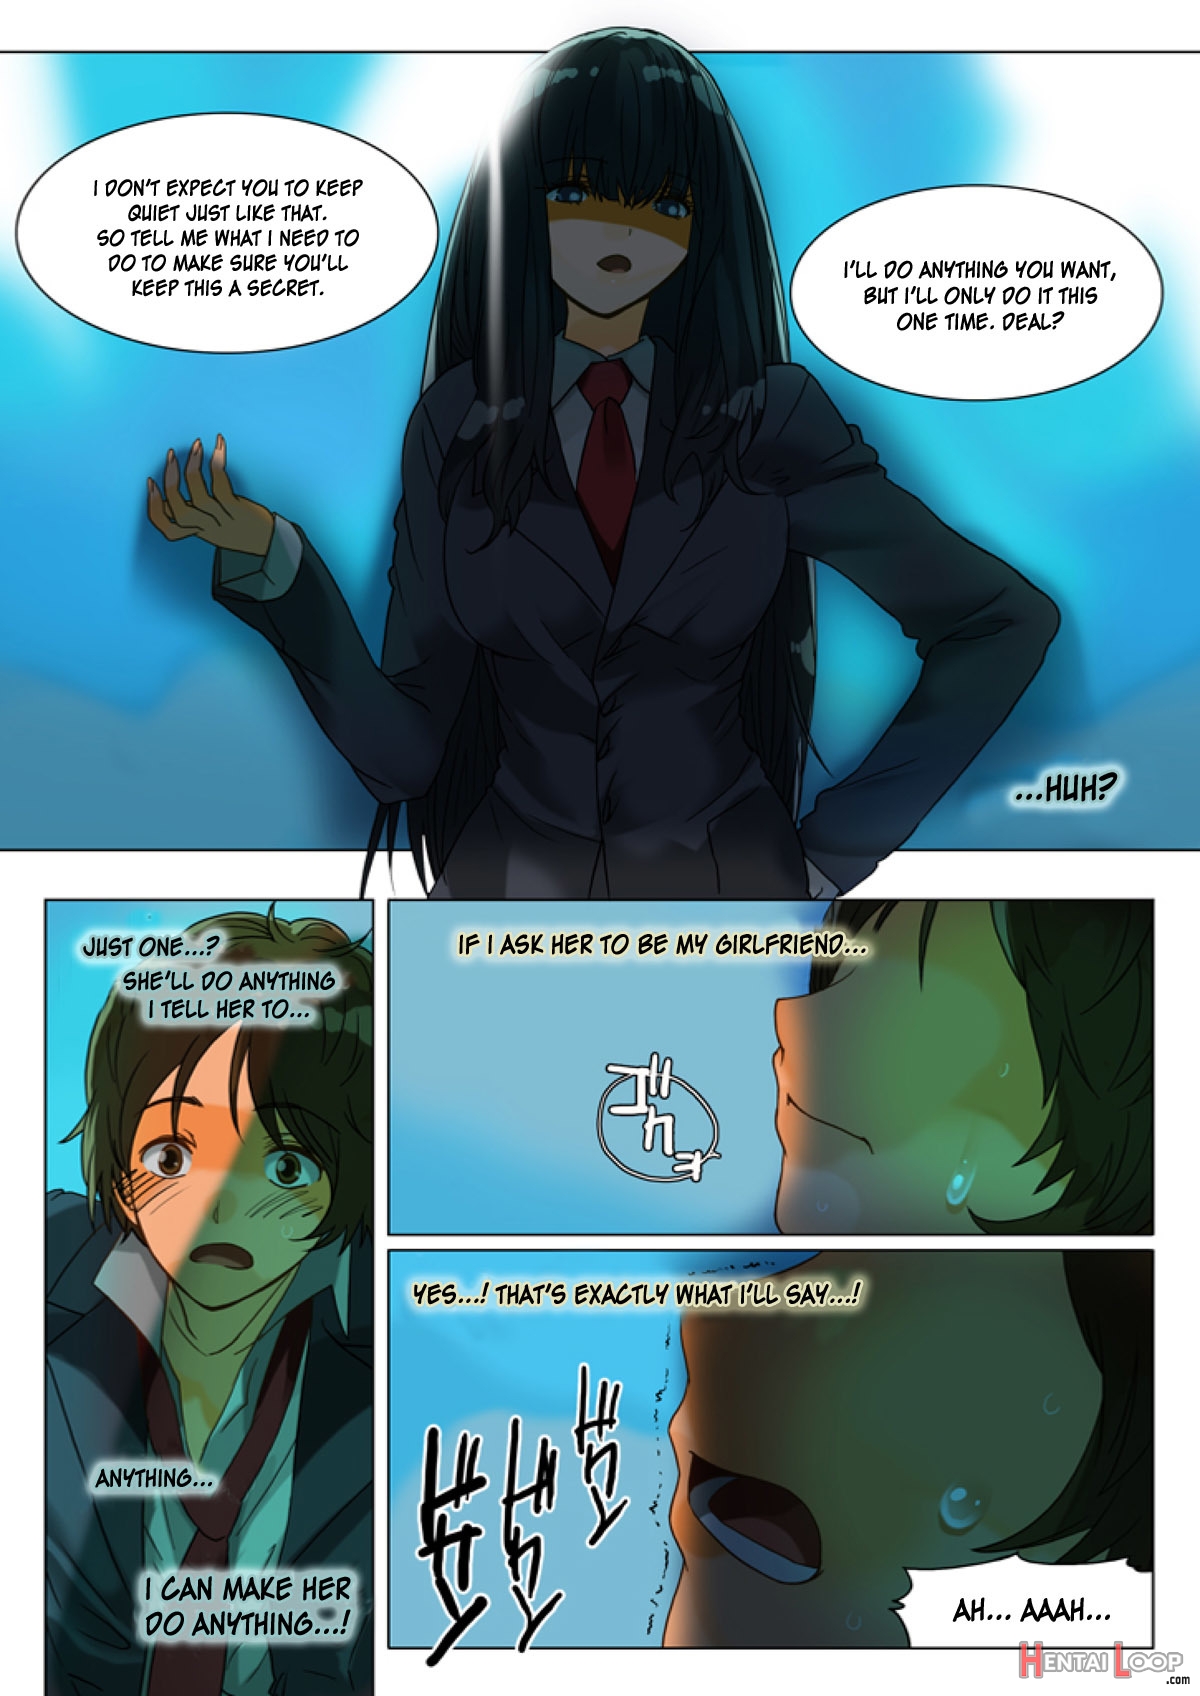 No Panty Girl Episode 1 page 10